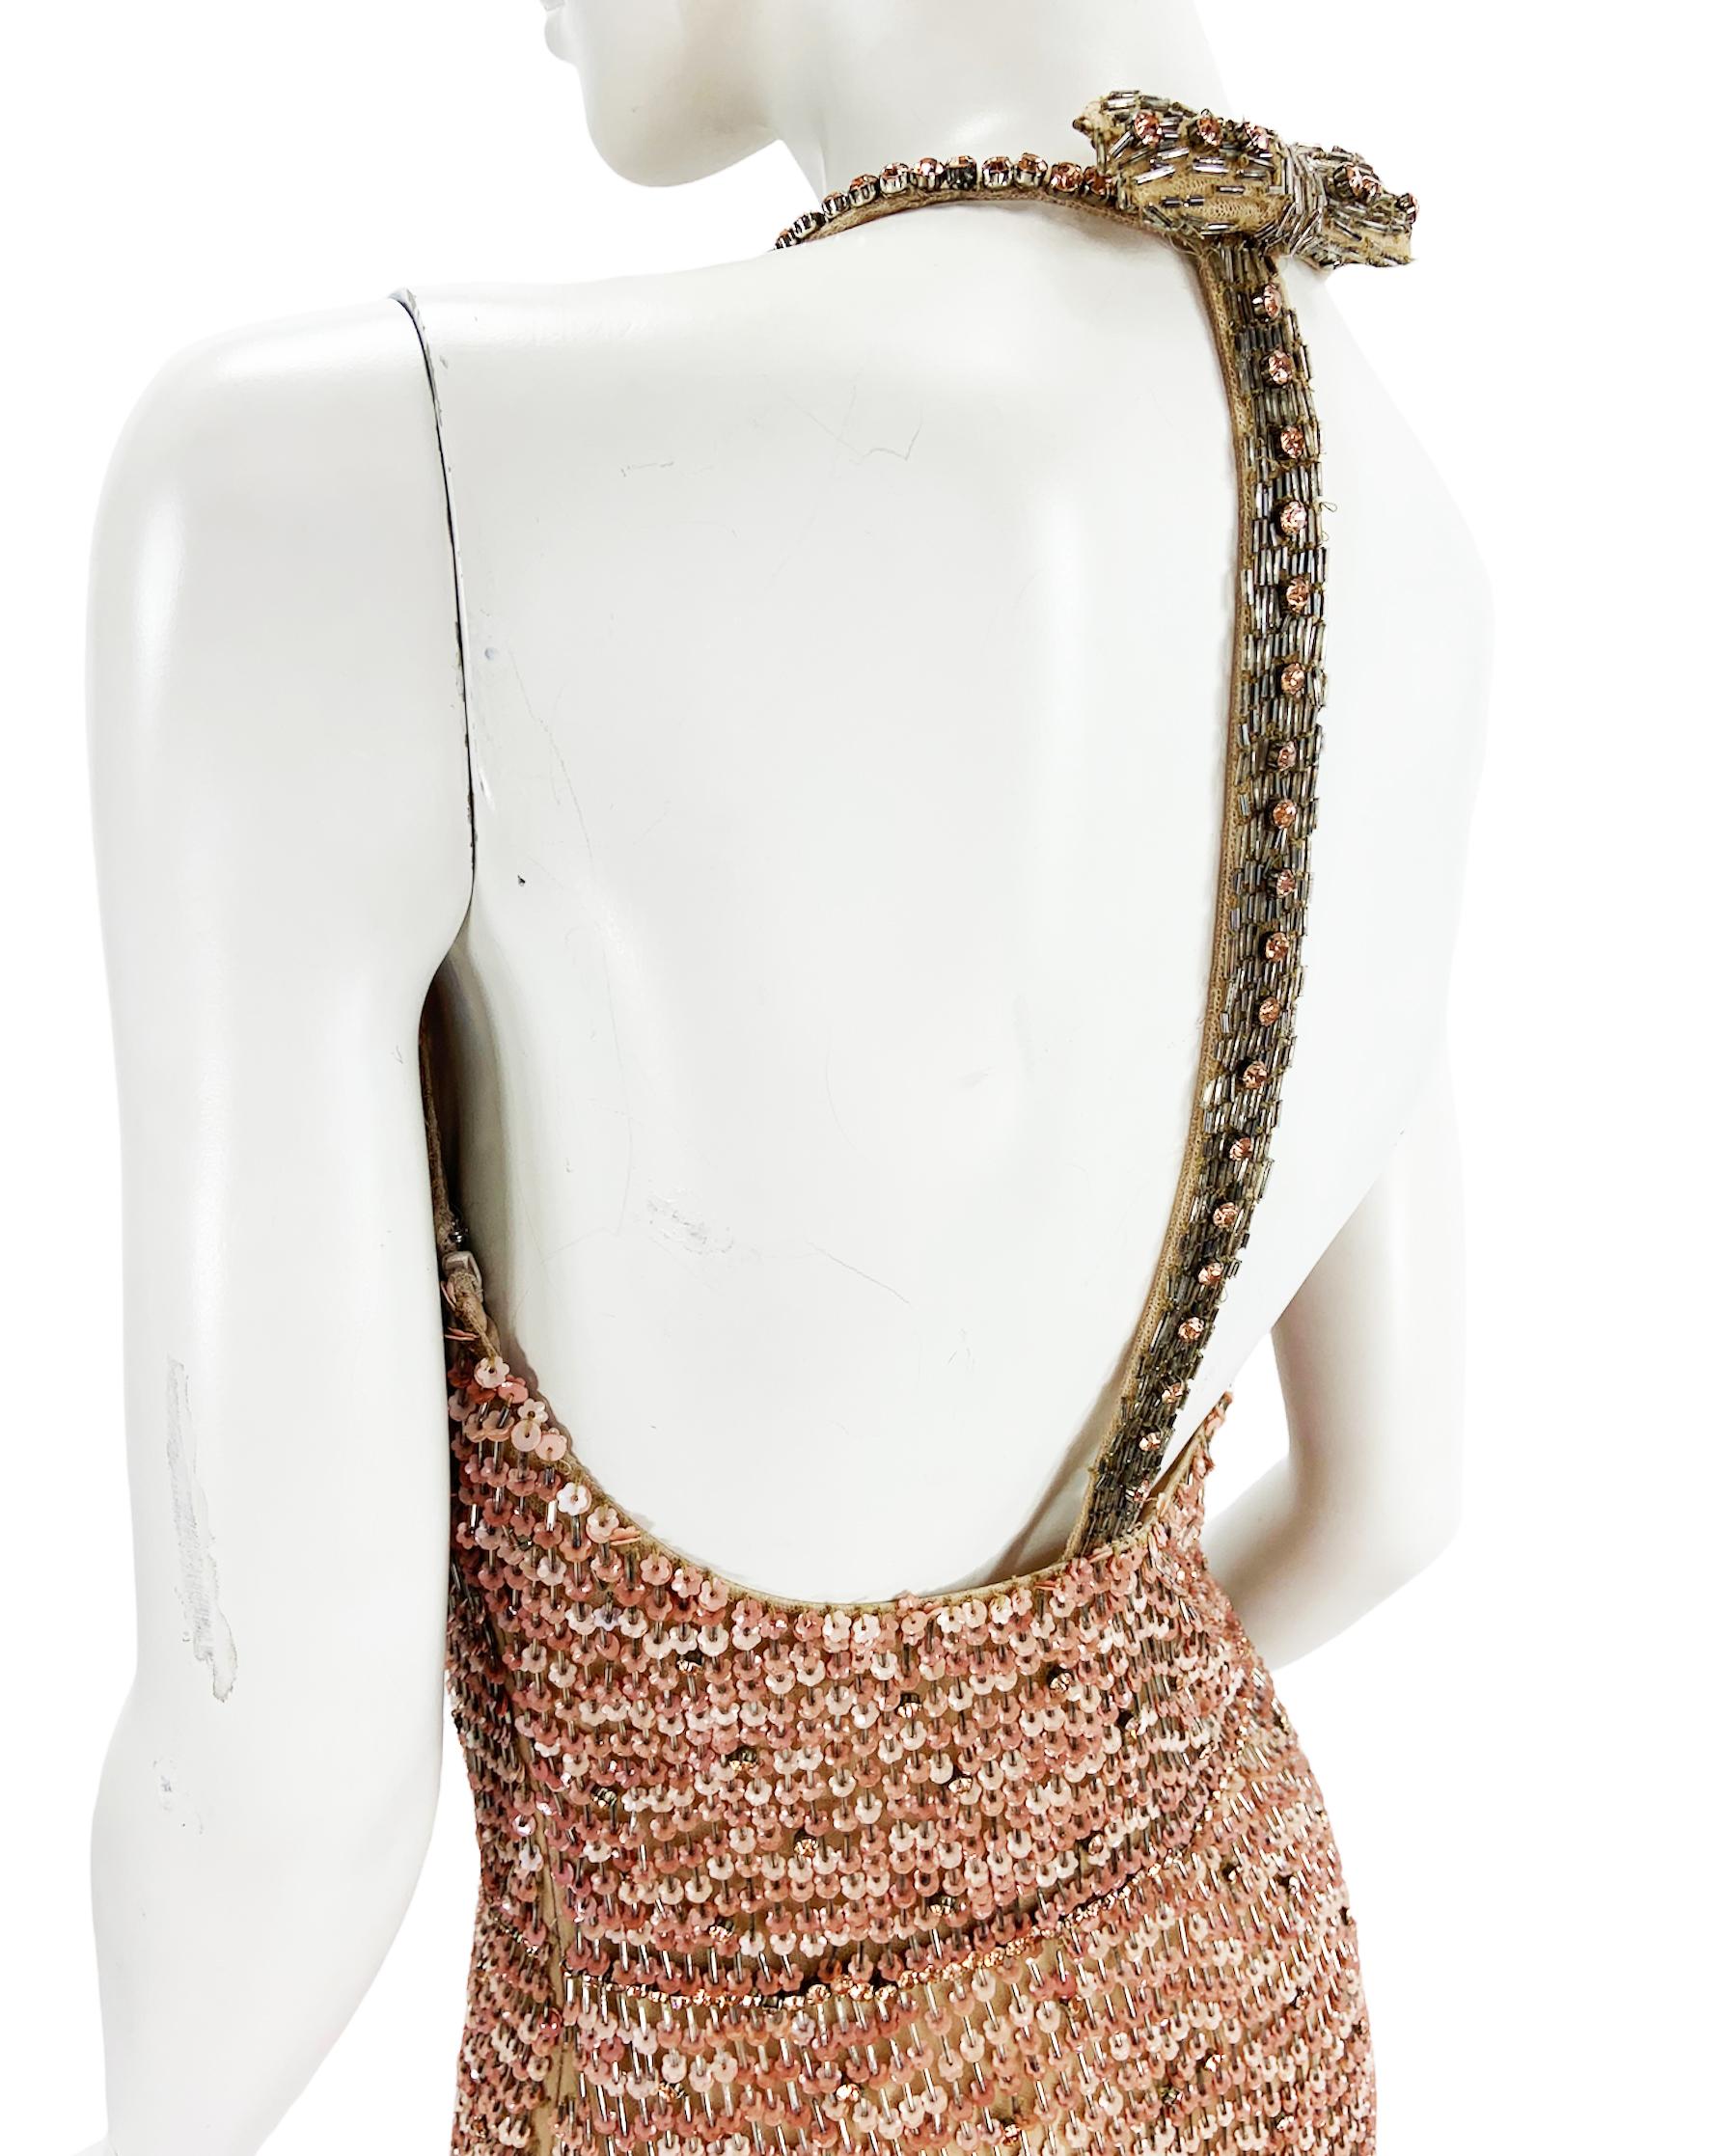 NWT Vintage Valentino Fully Beaded Blush Pink Open Back Cocktail Dress It 40 en vente 3